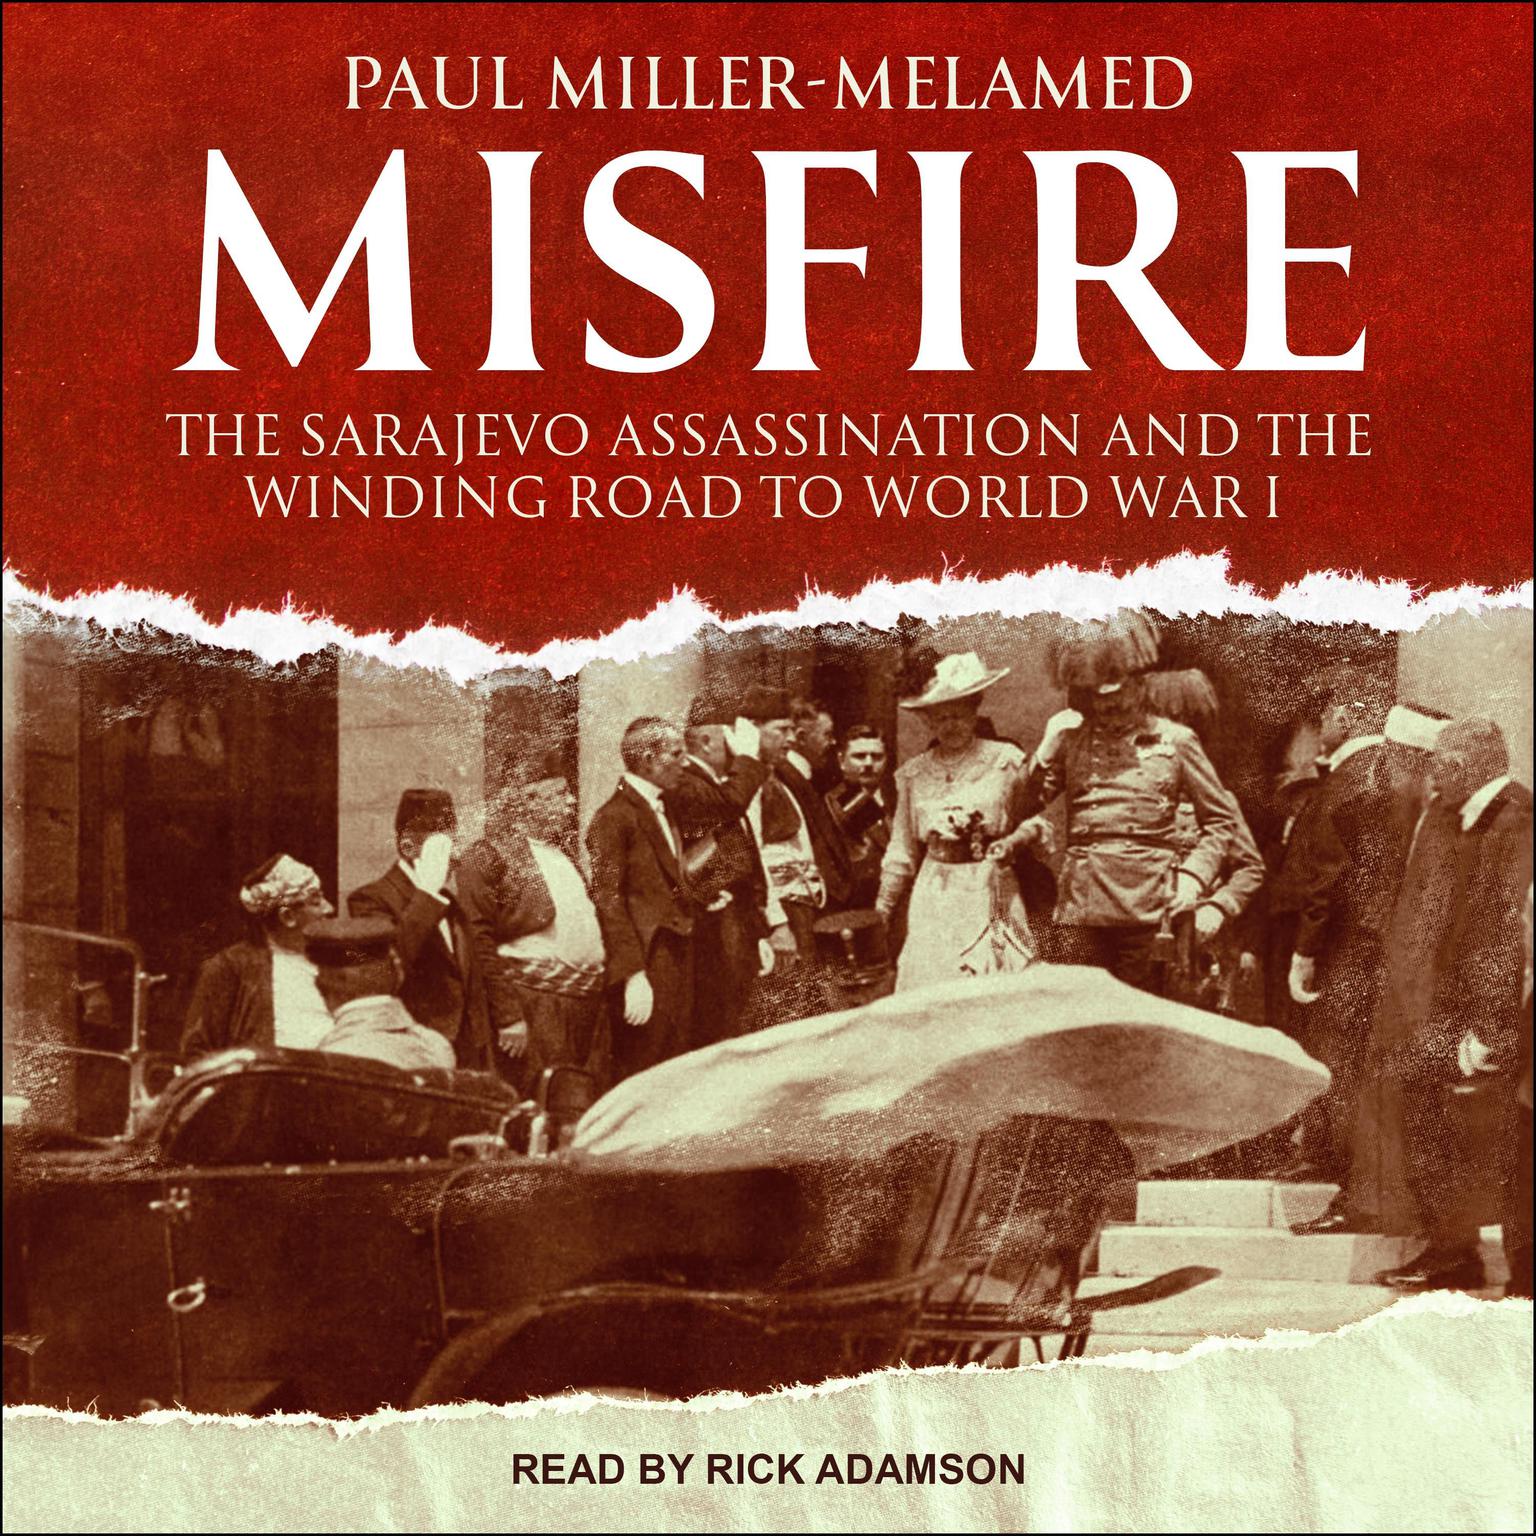 Misfire: The Sarajevo Assassination and the Winding Road to World War I Audiobook, by Paul Miller-Melamed